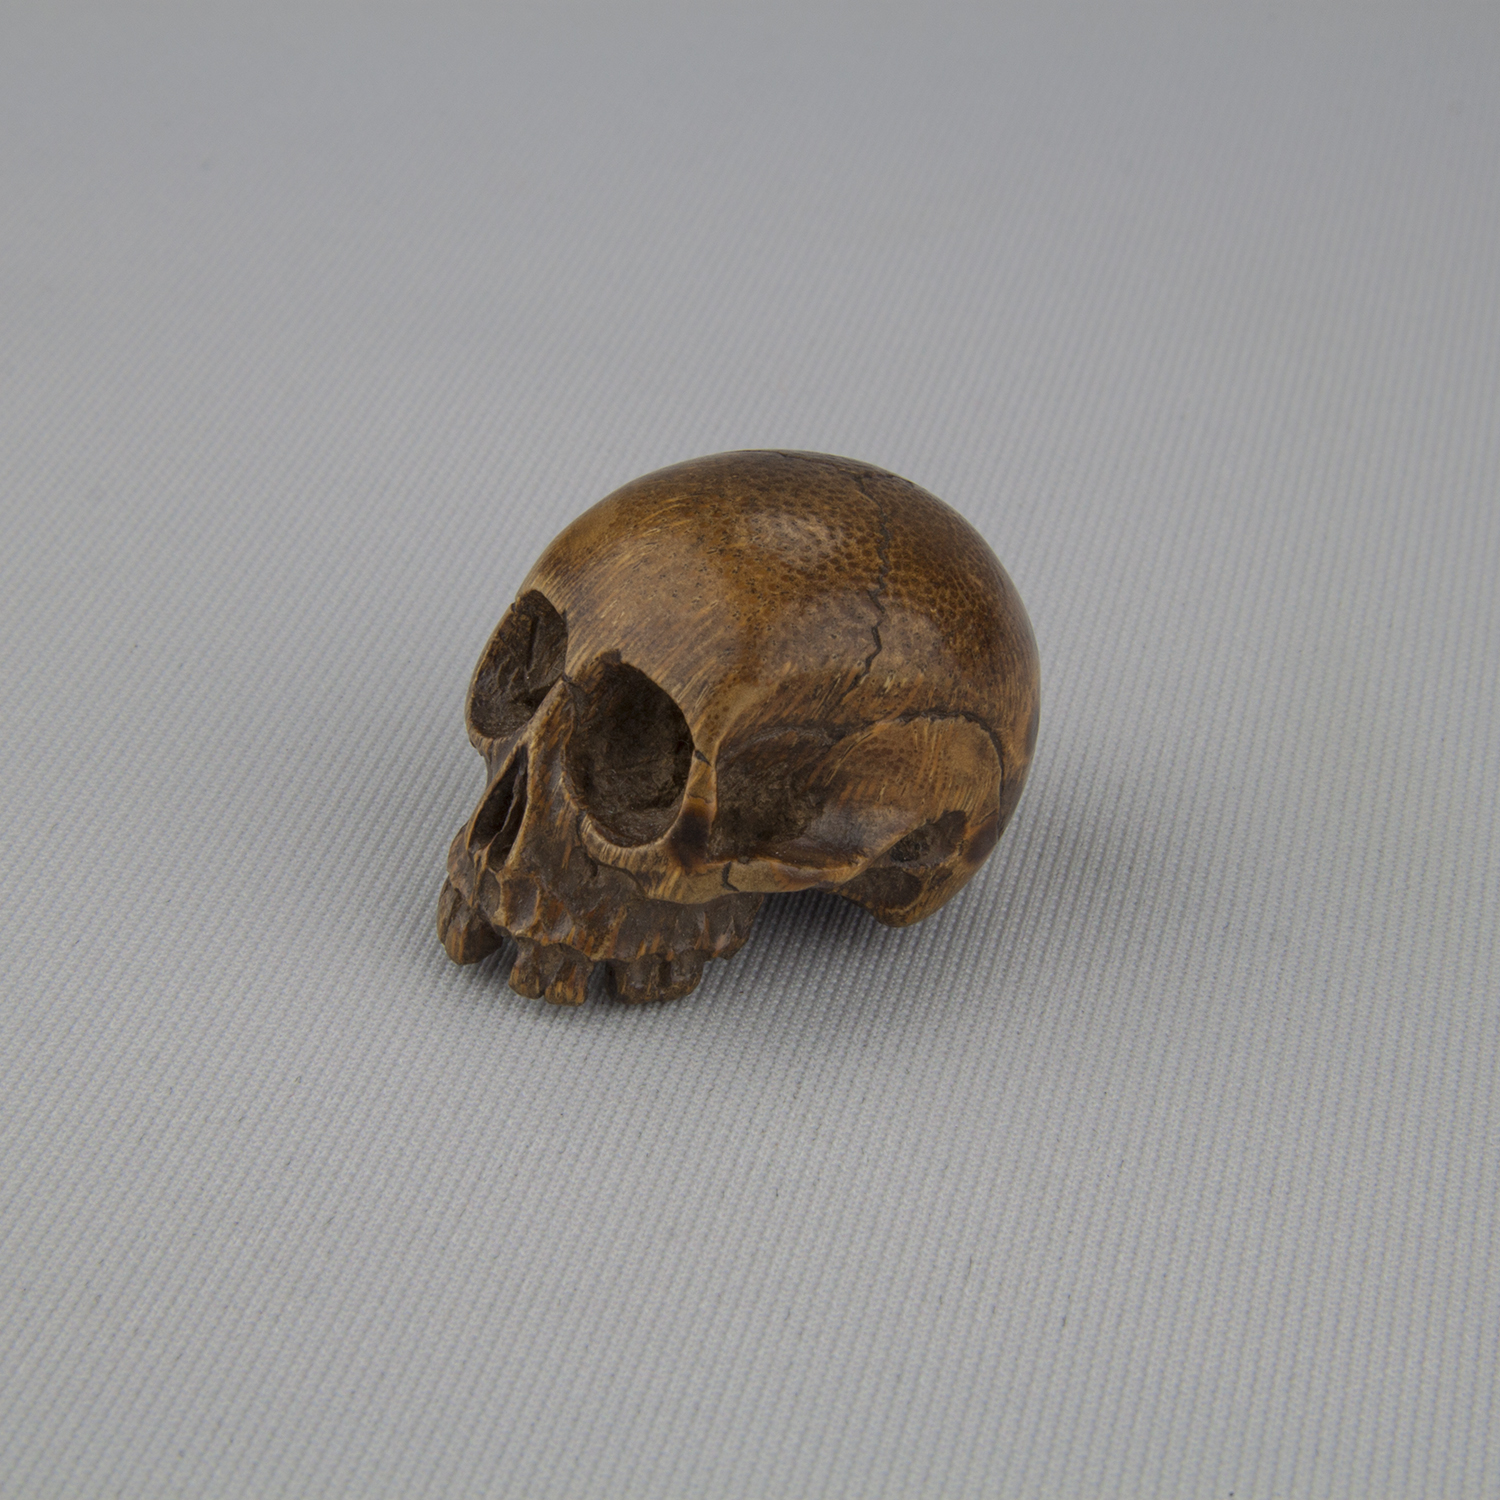 Netsuke depicting a human skull, ca. 18th–19th century, bamboo root, The Herman D. Doochin Collection, 1992.157